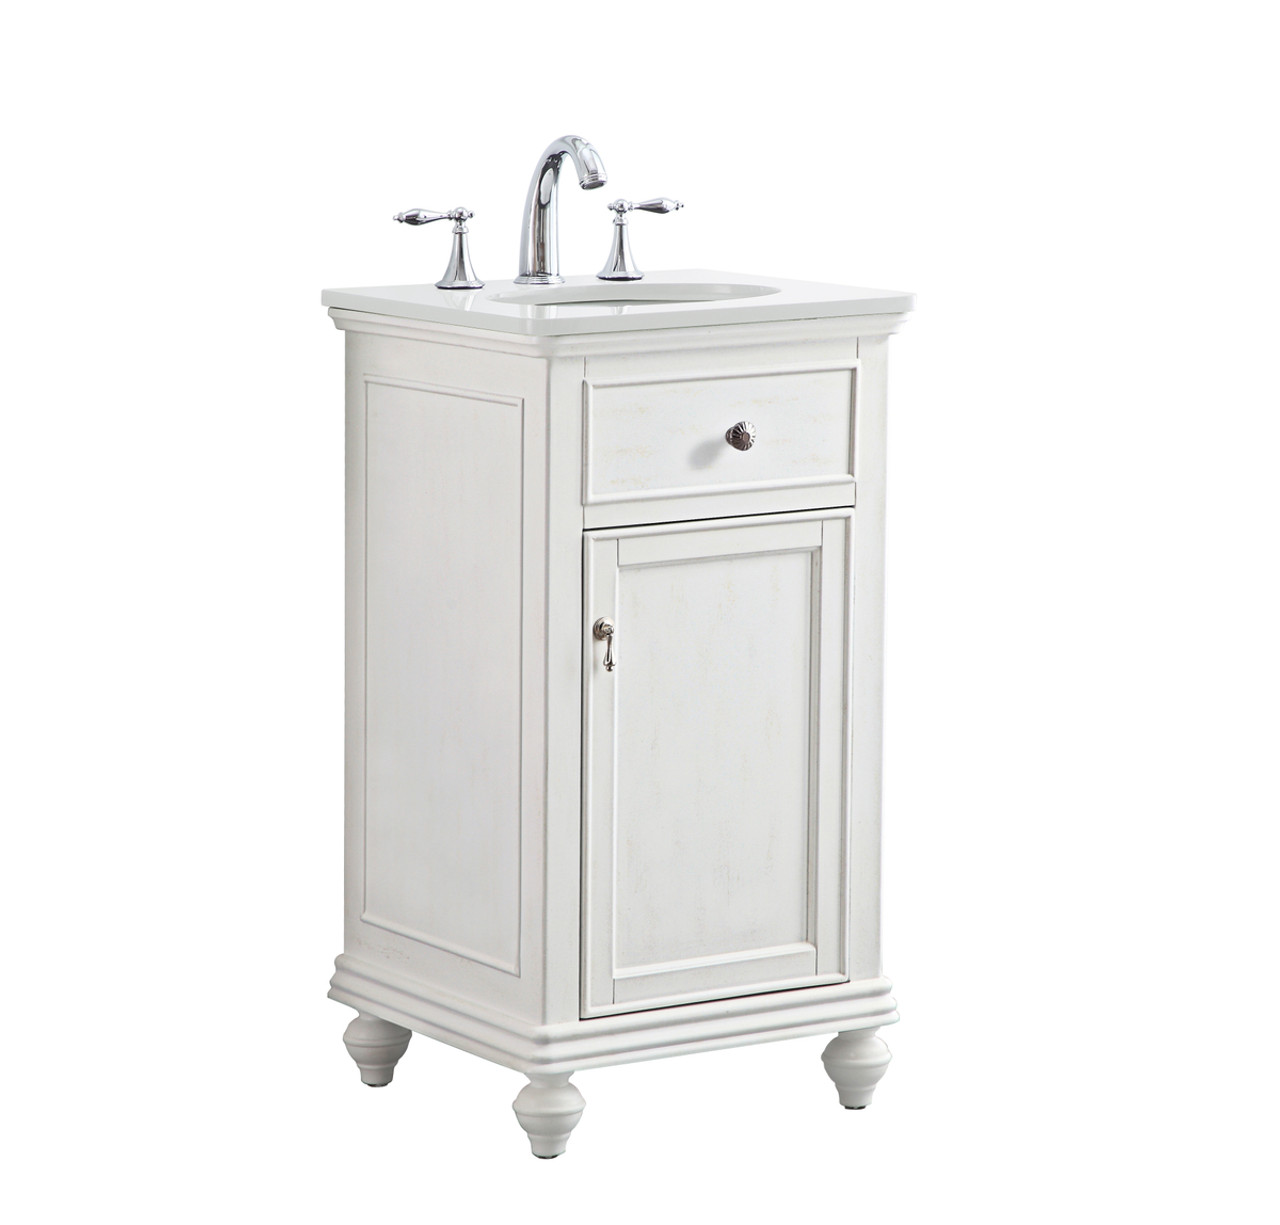 Elegant Kitchen and Bath VF12319AW-VW 19 inch Single Bathroom vanity in antique white with ivory white engineered marble